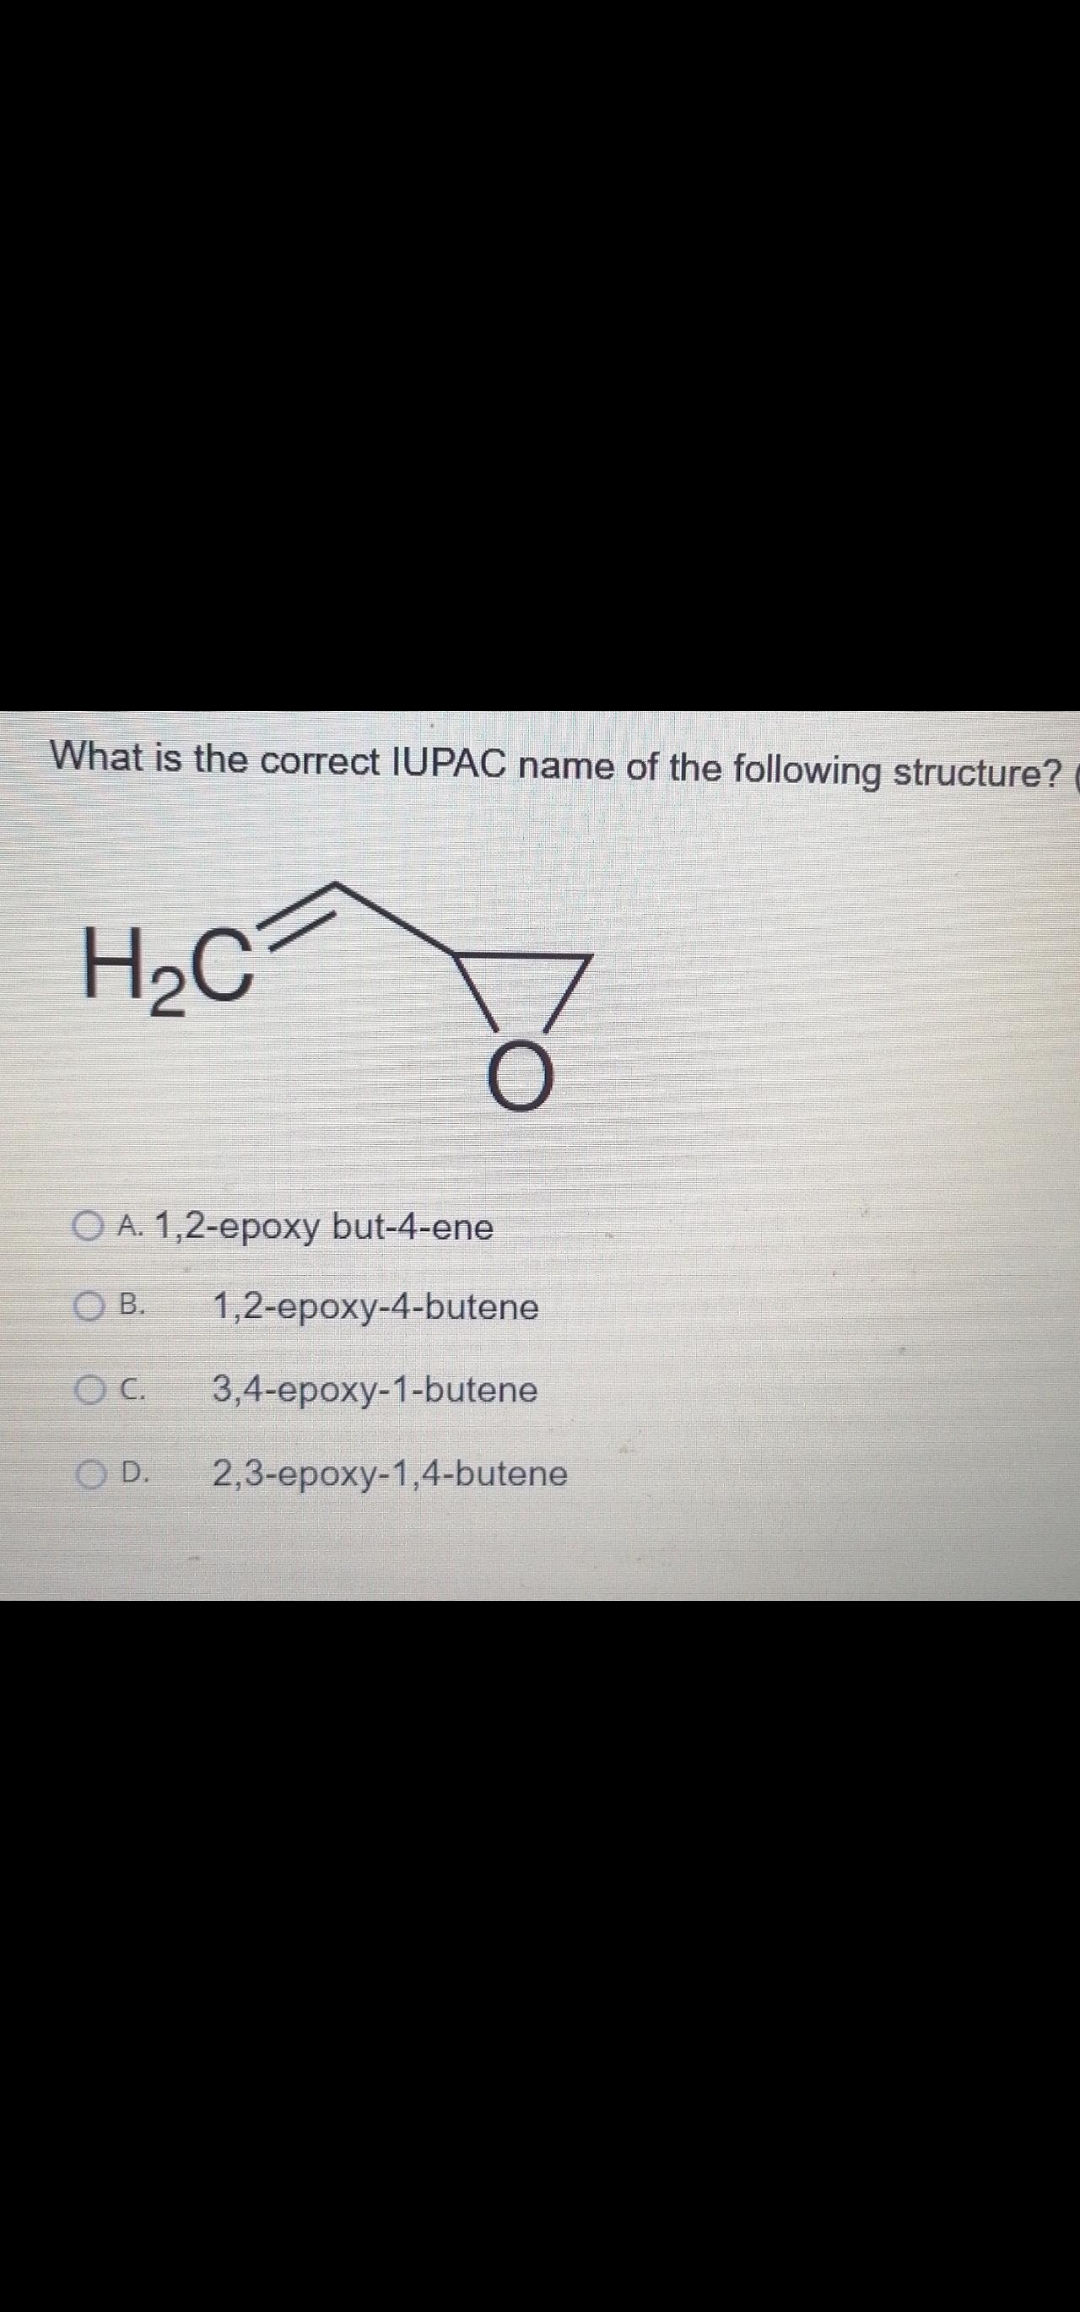 What is the correct IUPAC name of the following structure?
H2C
O A. 1,2-epoxy but-4-ene
O B.
1,2-epoxy-4-butene
O C.
3,4-epoxy-1-butene
O D.
2,3-epoxy-1,4-butene
